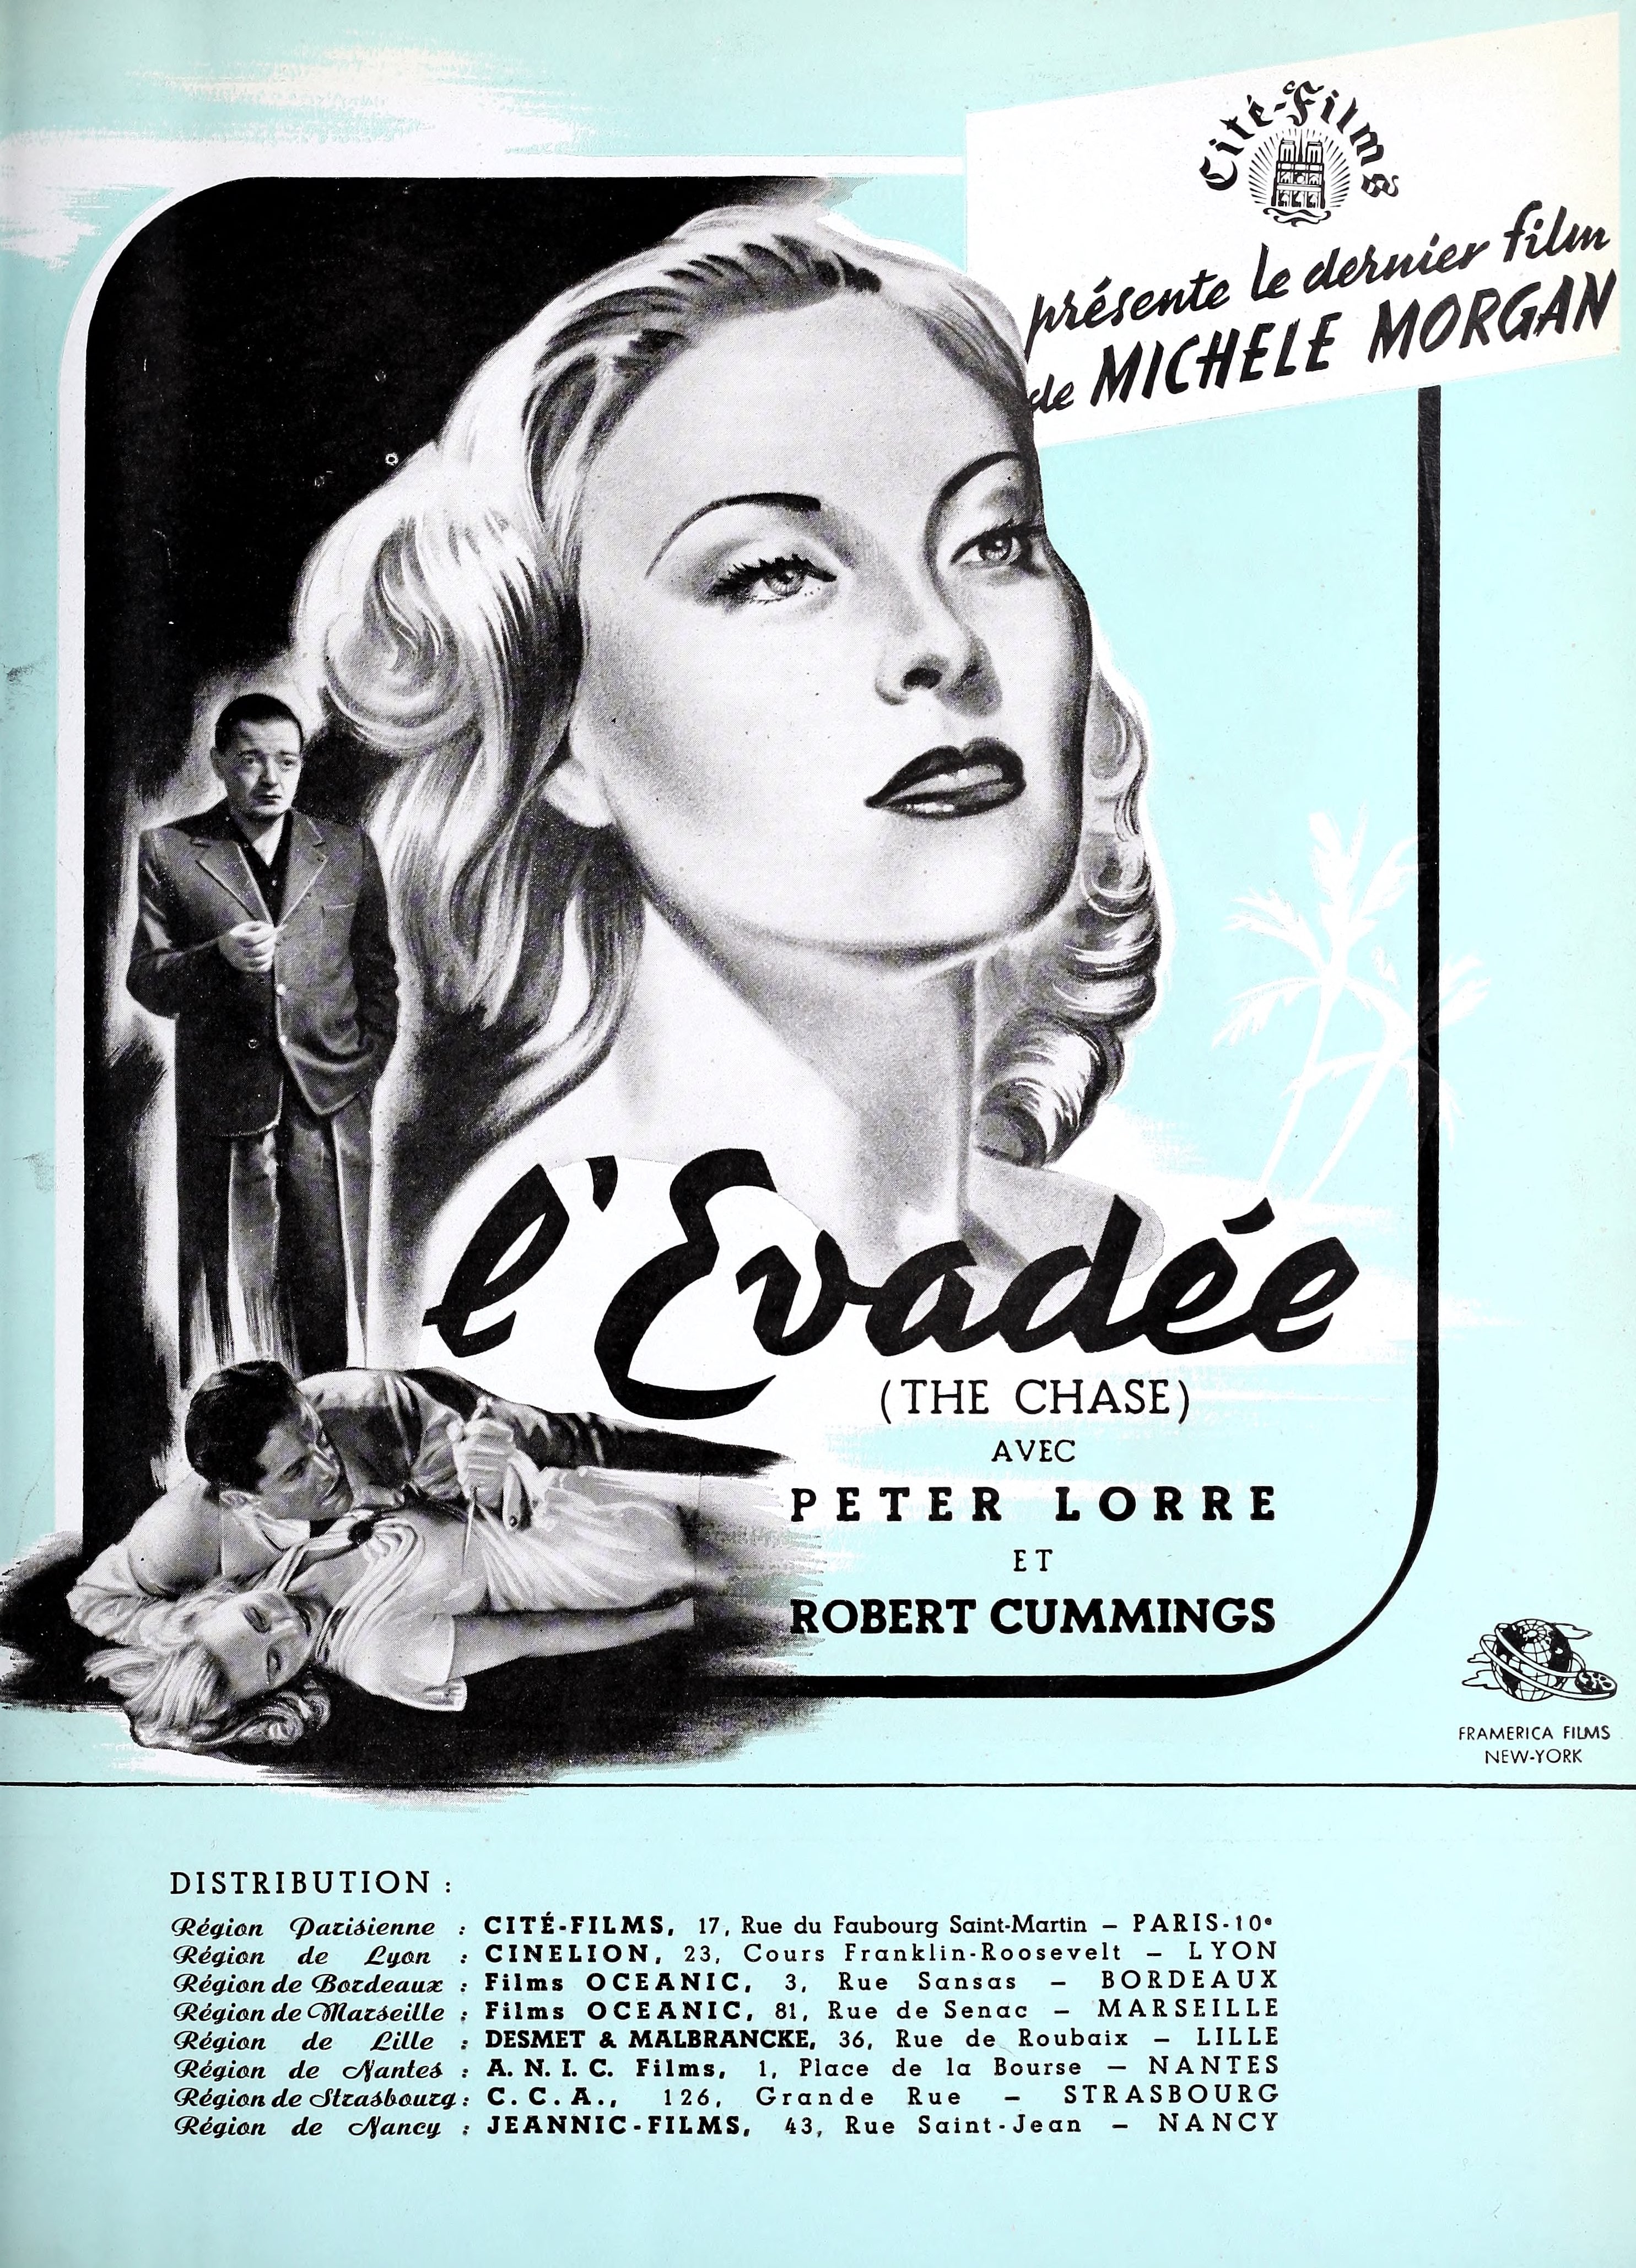 The Chase (1946) | www.vintoz.com